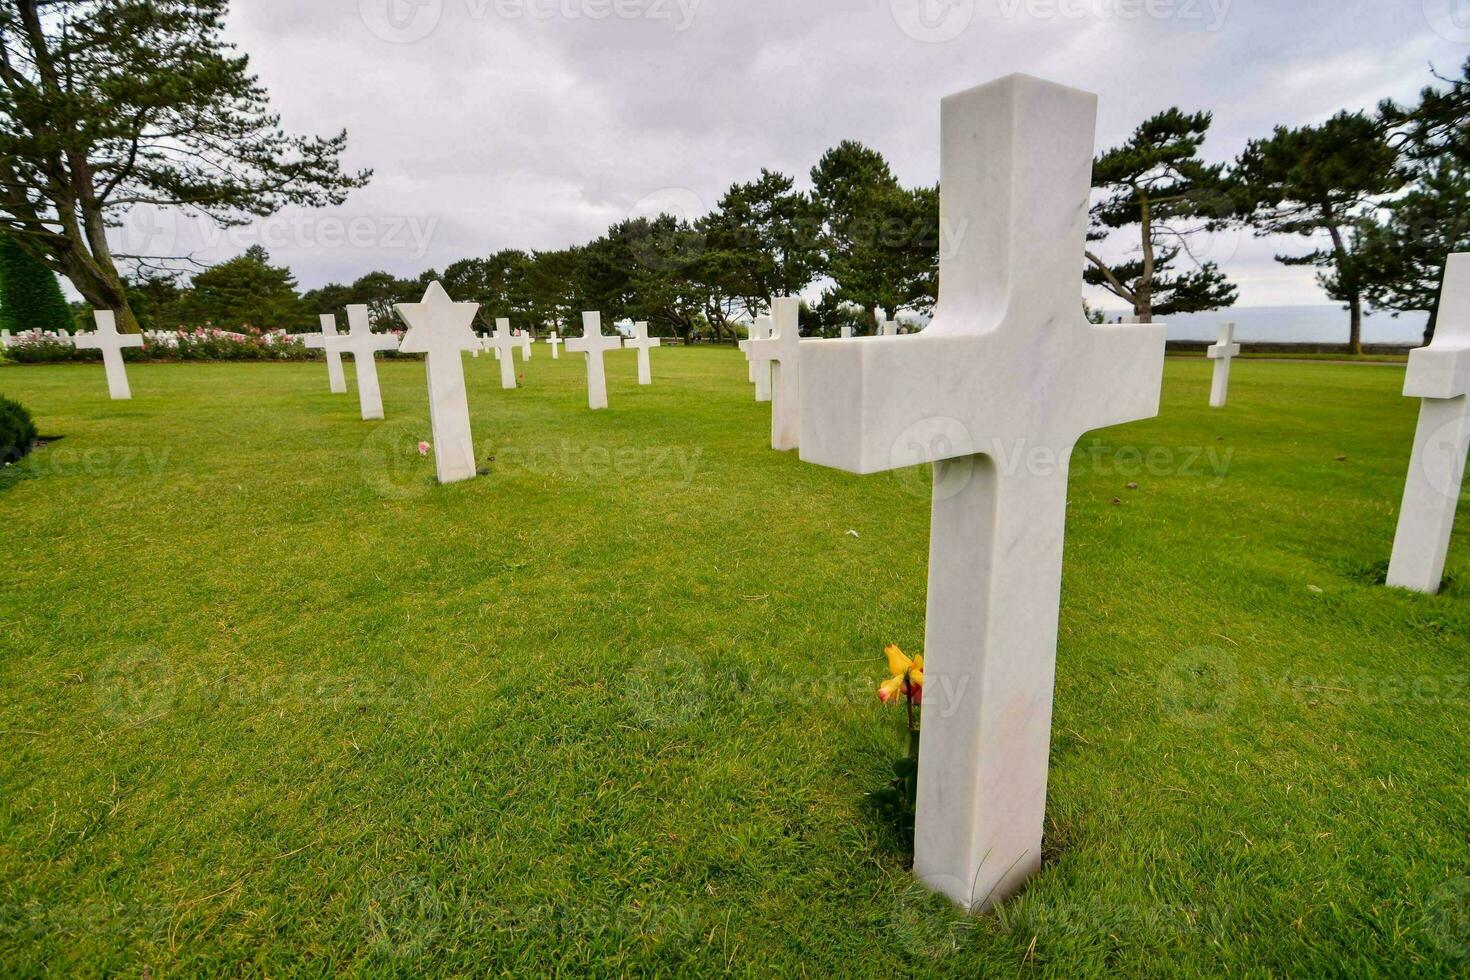 rows of white crosses in a grassy field photo